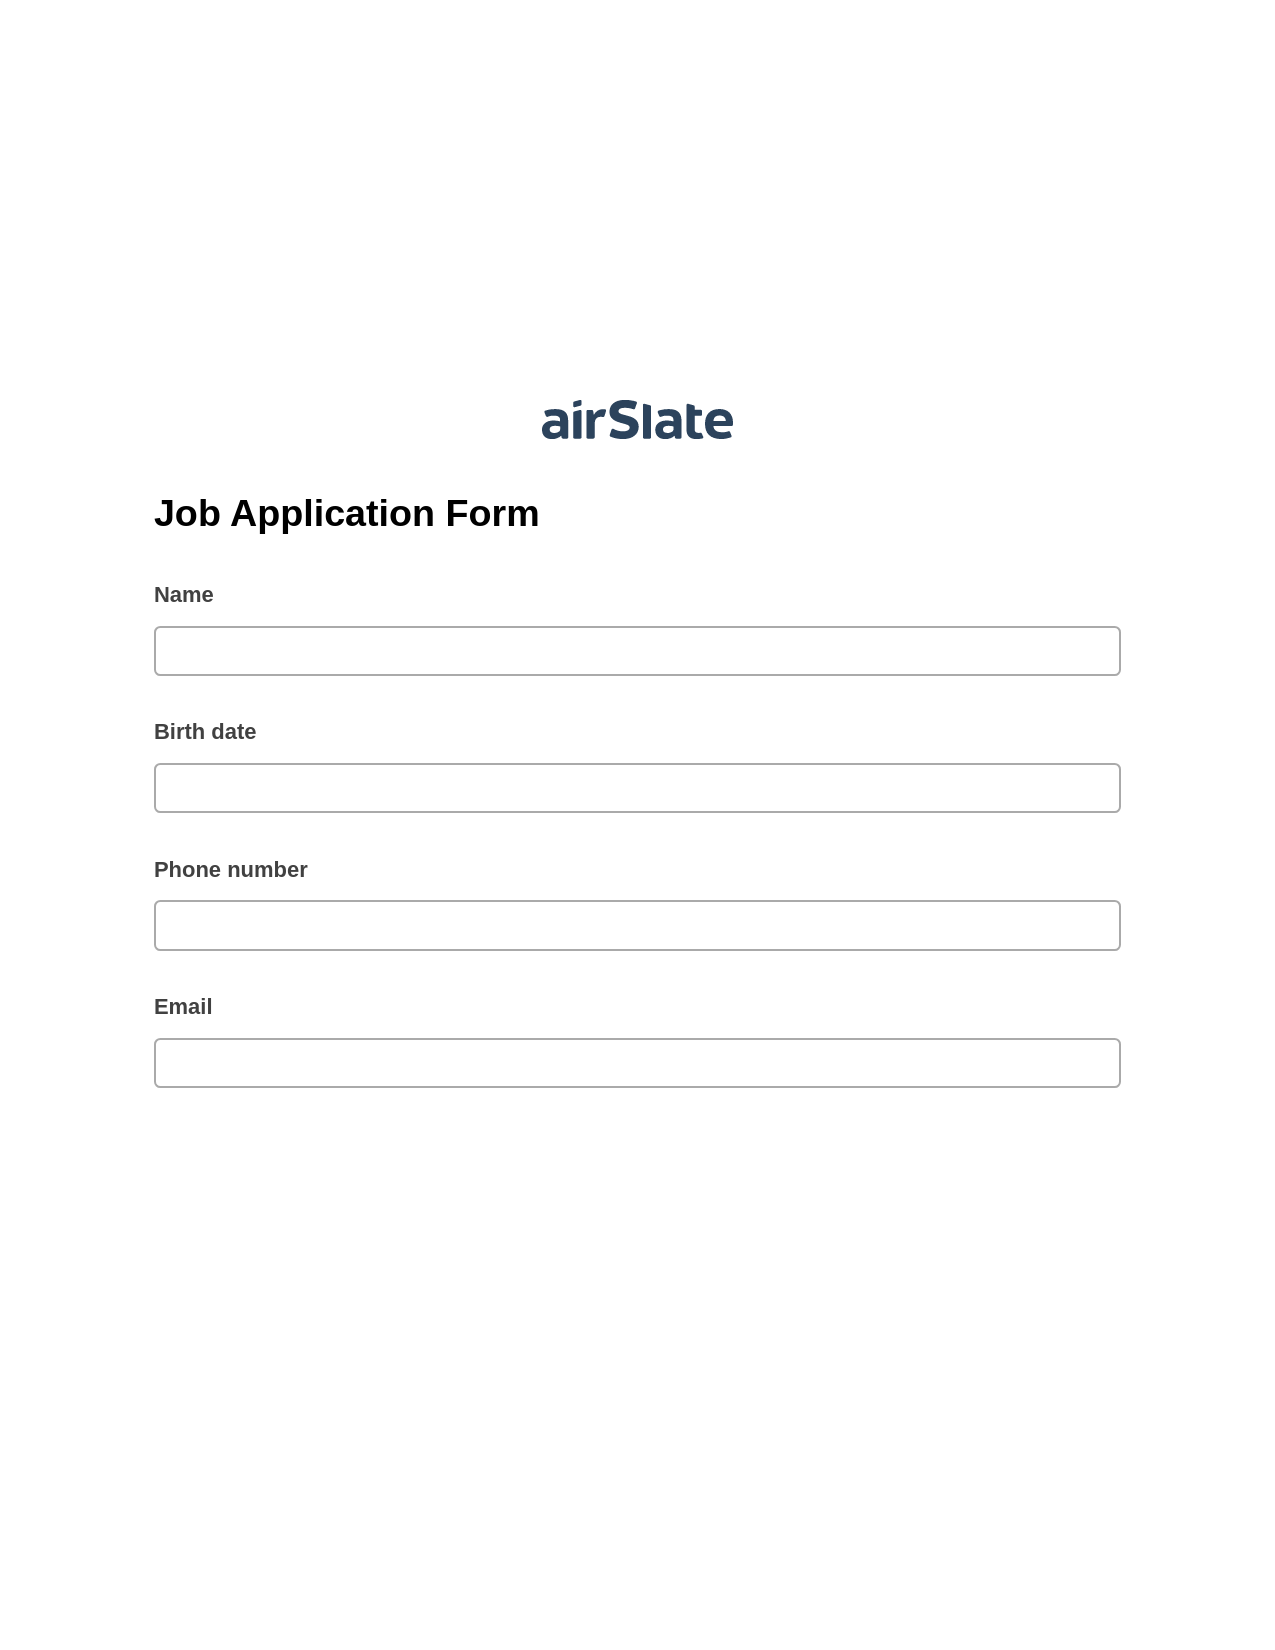 Job Application Form Pre-fill Dropdown from Airtable, Mailchimp send Campaign bot, Box Bot